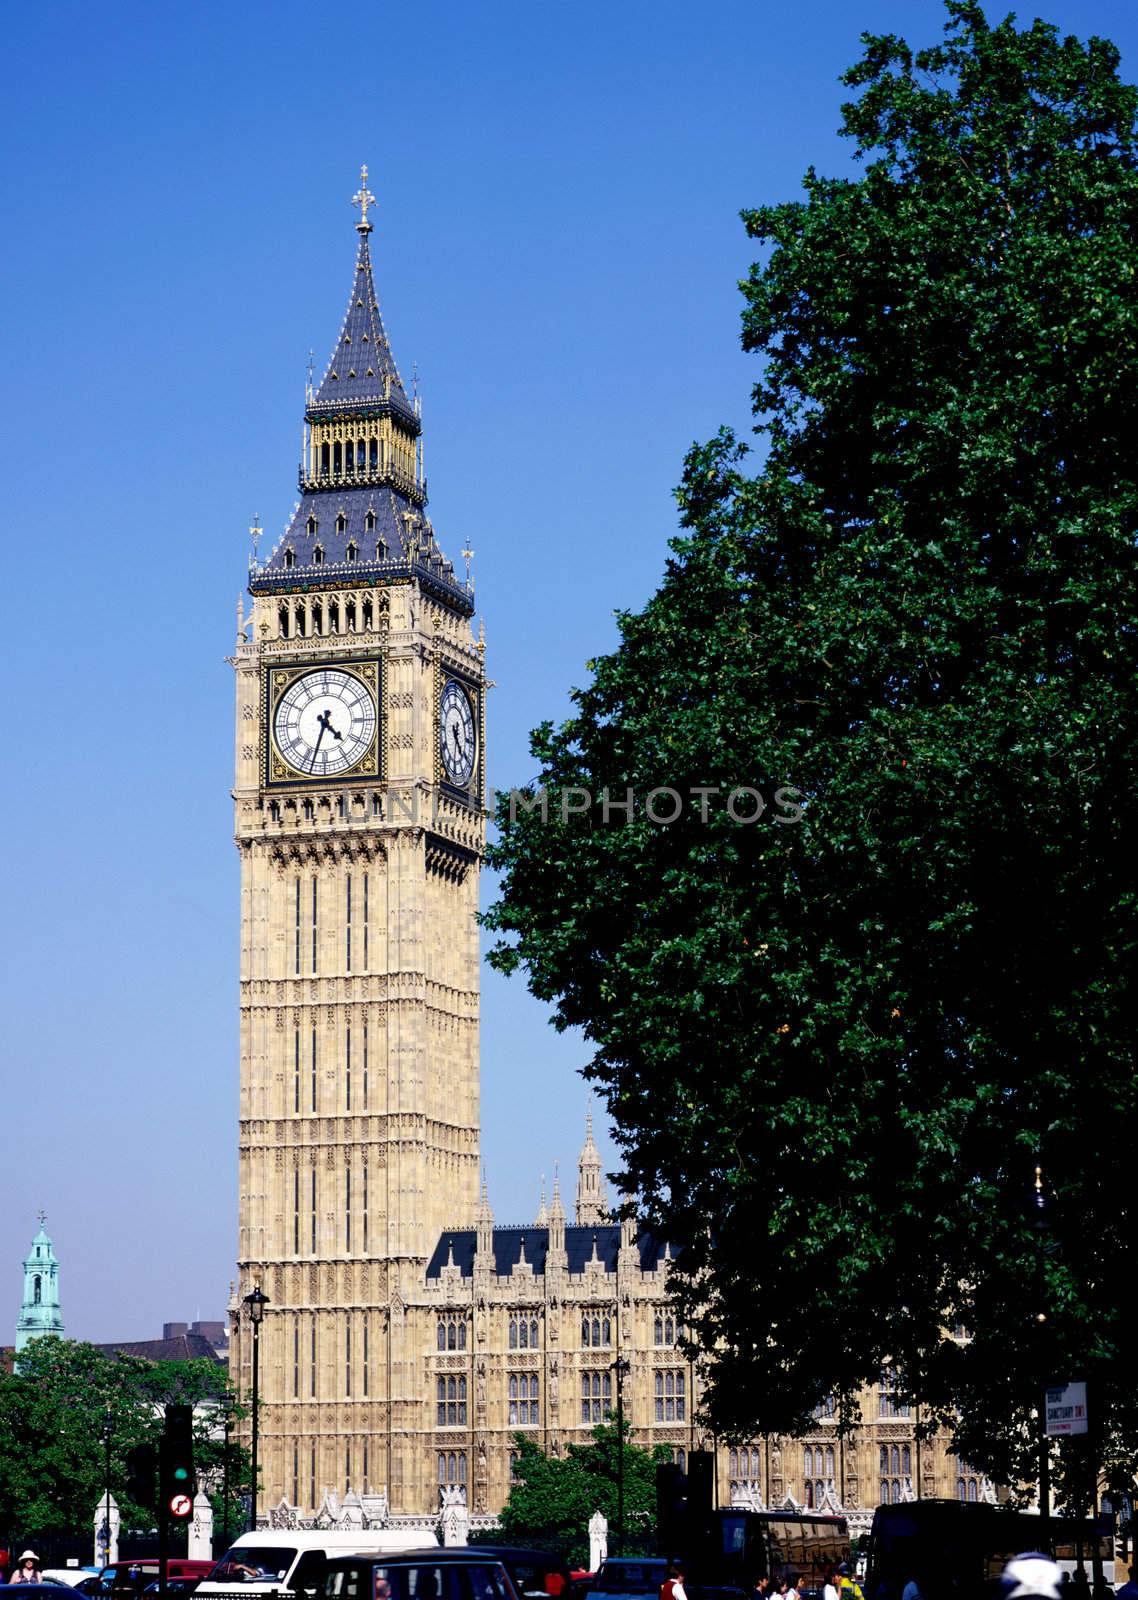 The clock tower at the Palace of Westminster